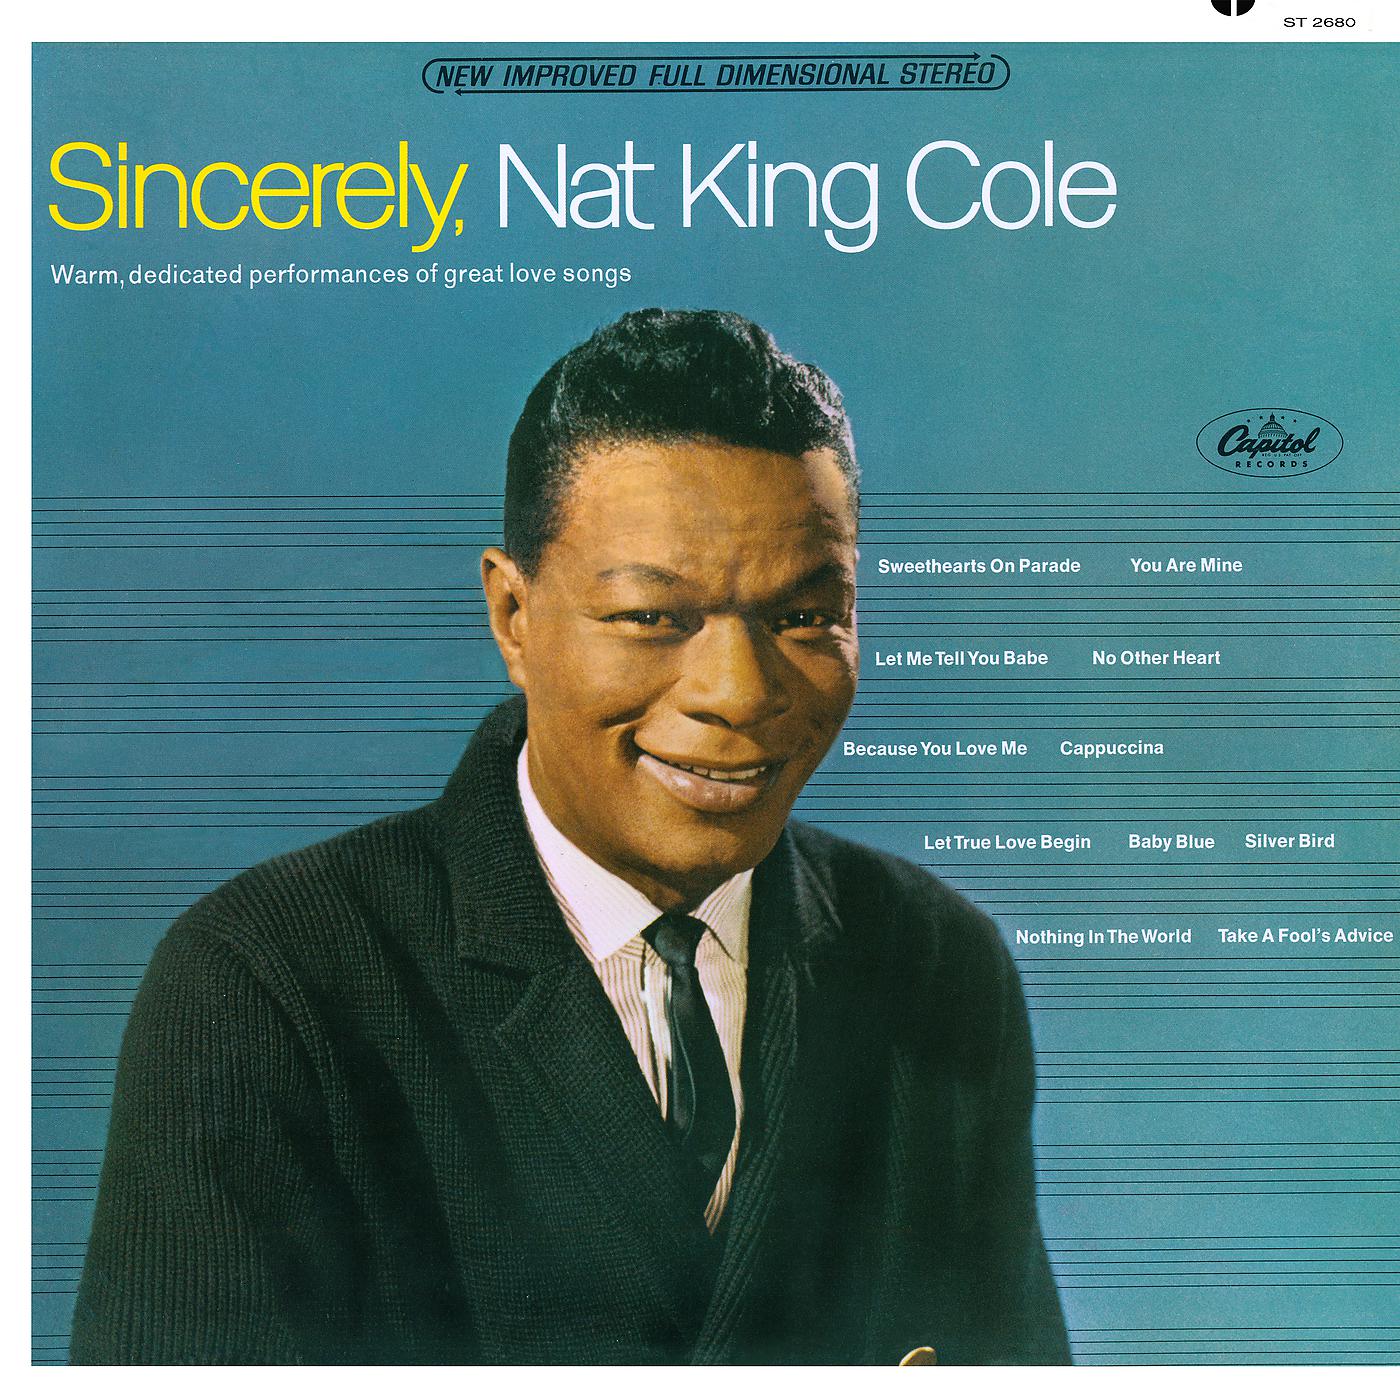 Nat King Cole - You Are Mine